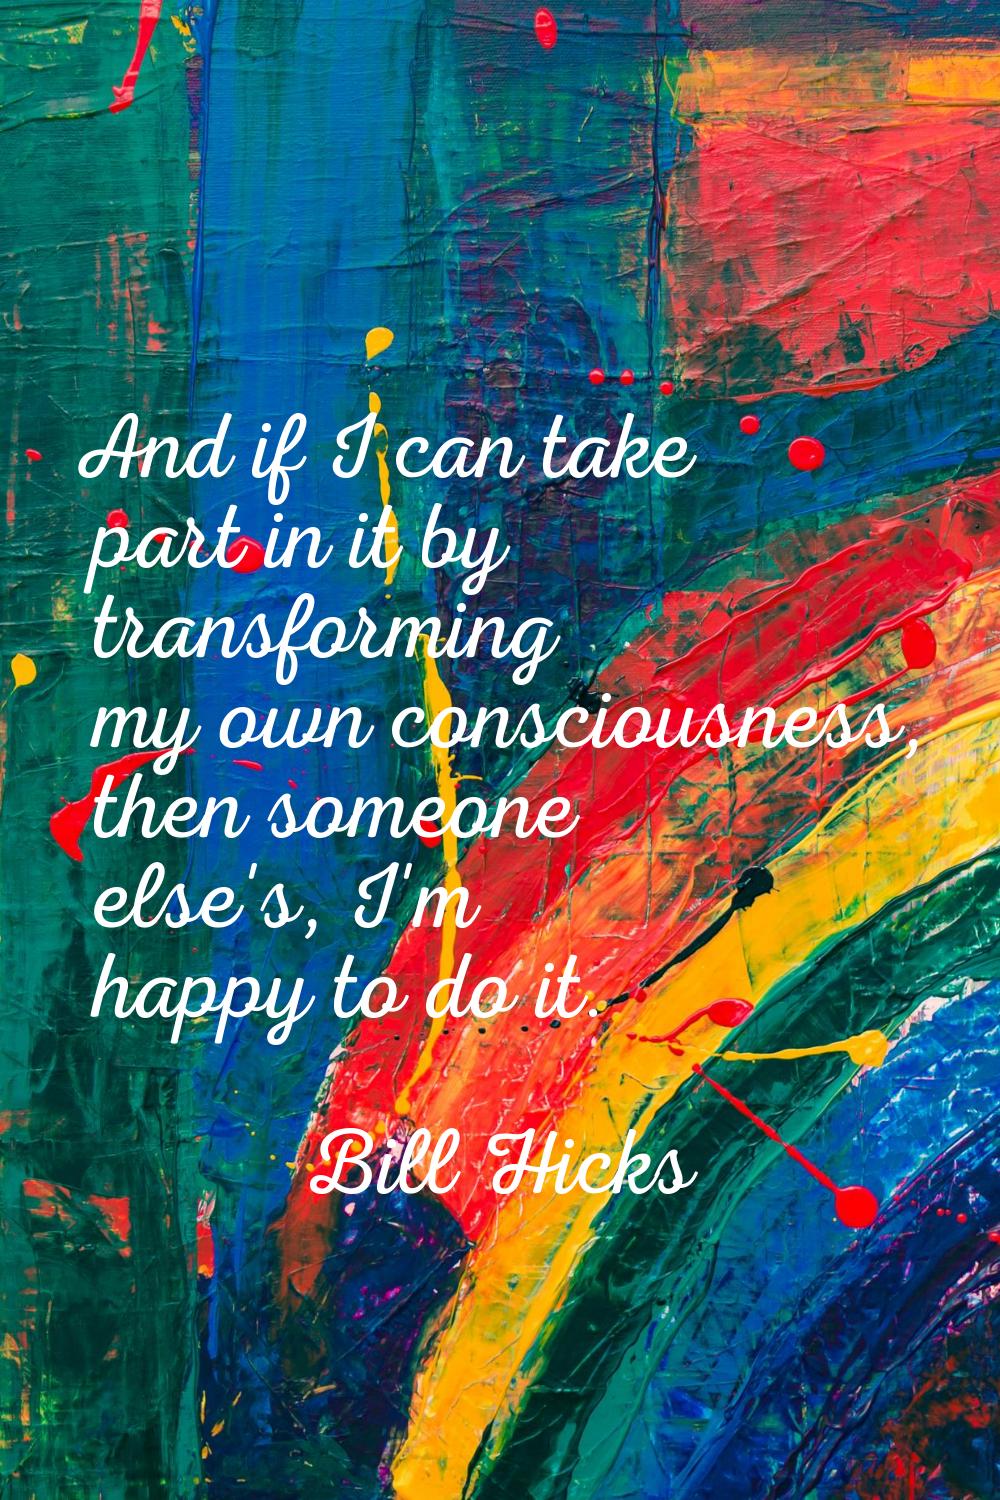 And if I can take part in it by transforming my own consciousness, then someone else's, I'm happy t